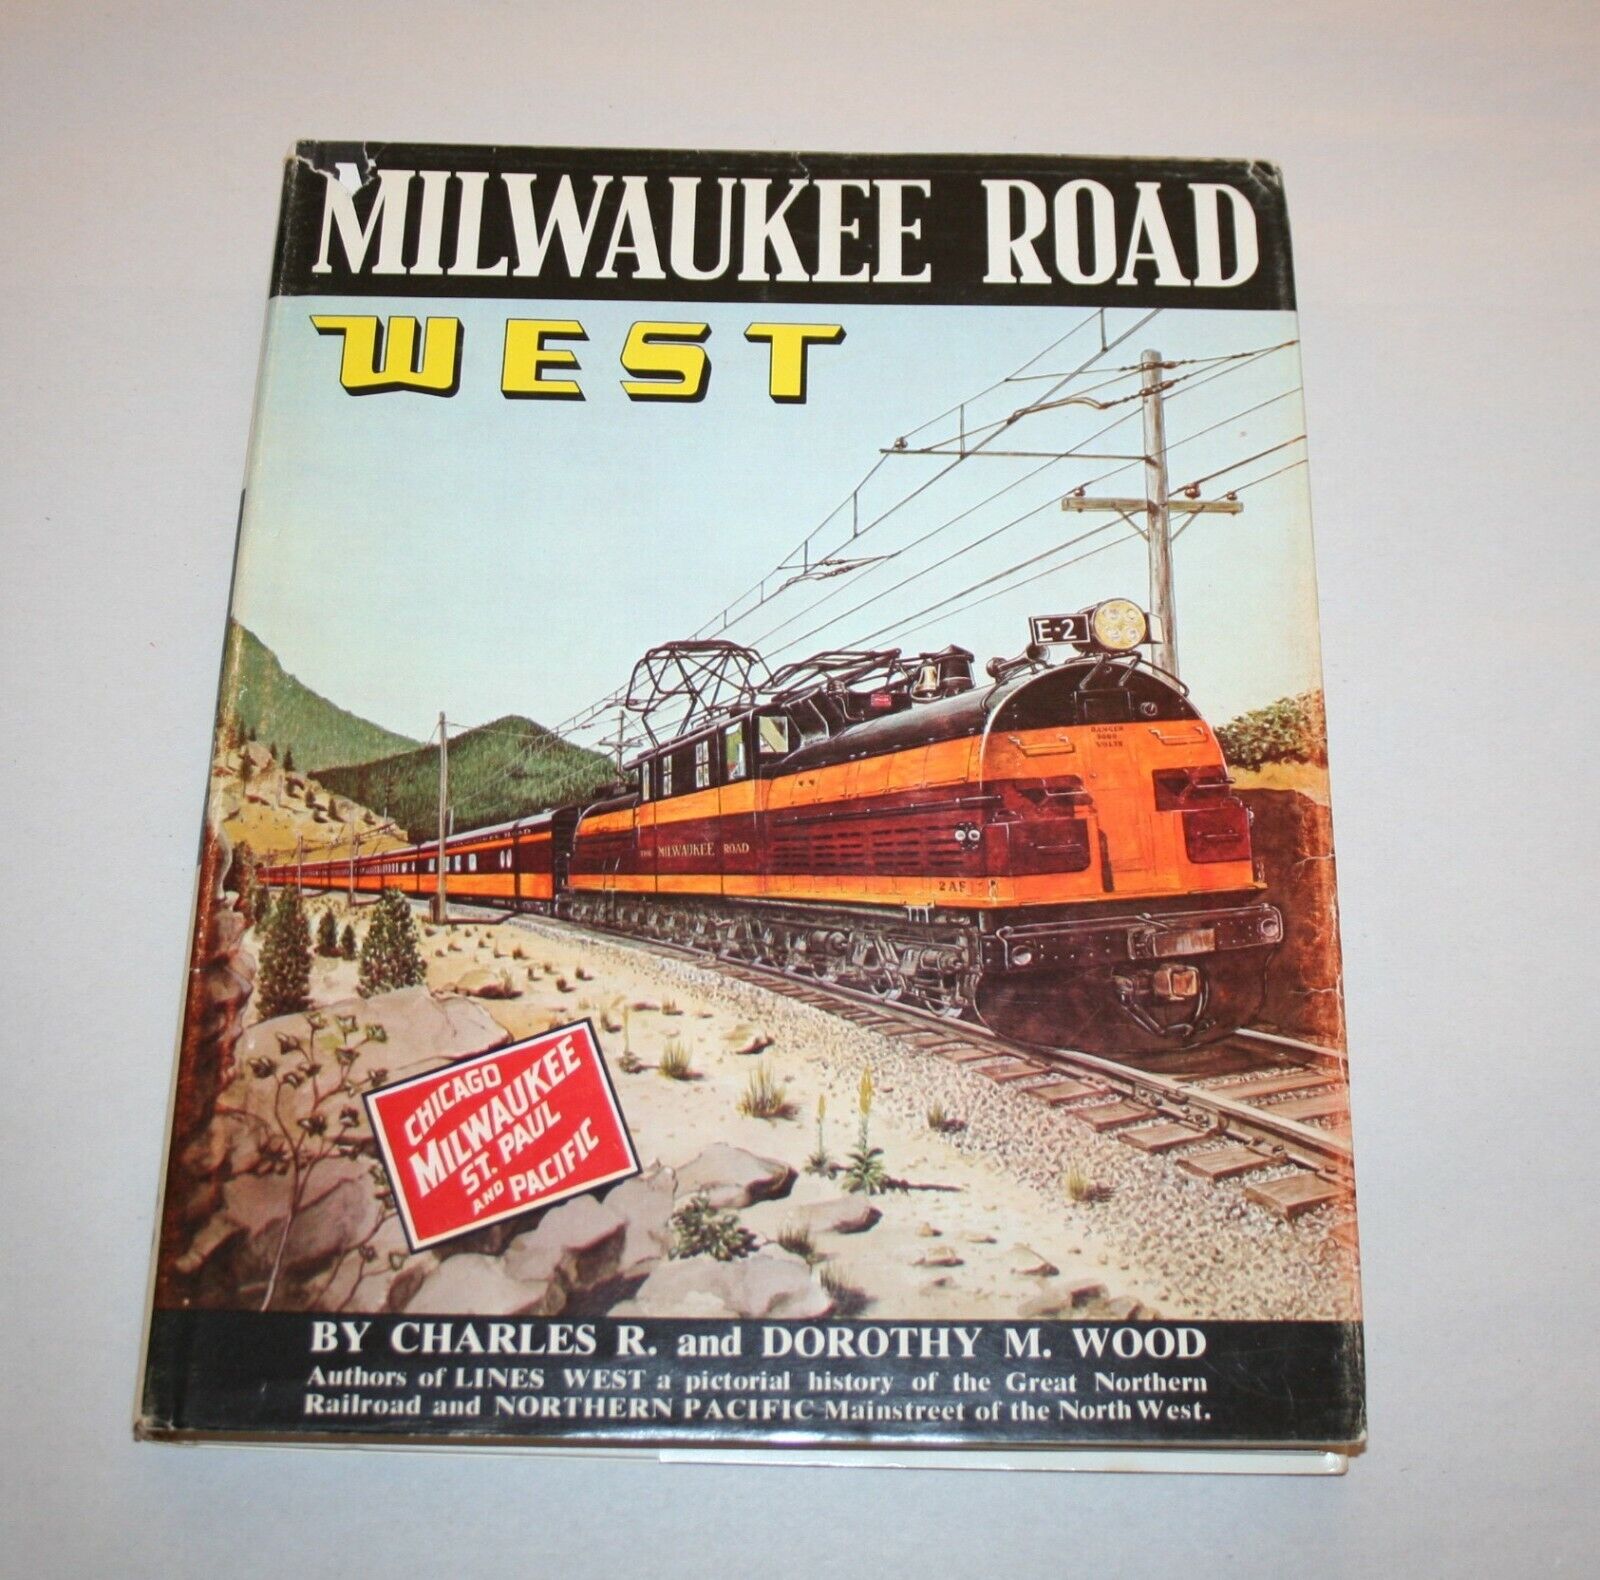 The Milwaukee Road West - By Charles and Dorothy Wood 1972 First Edition